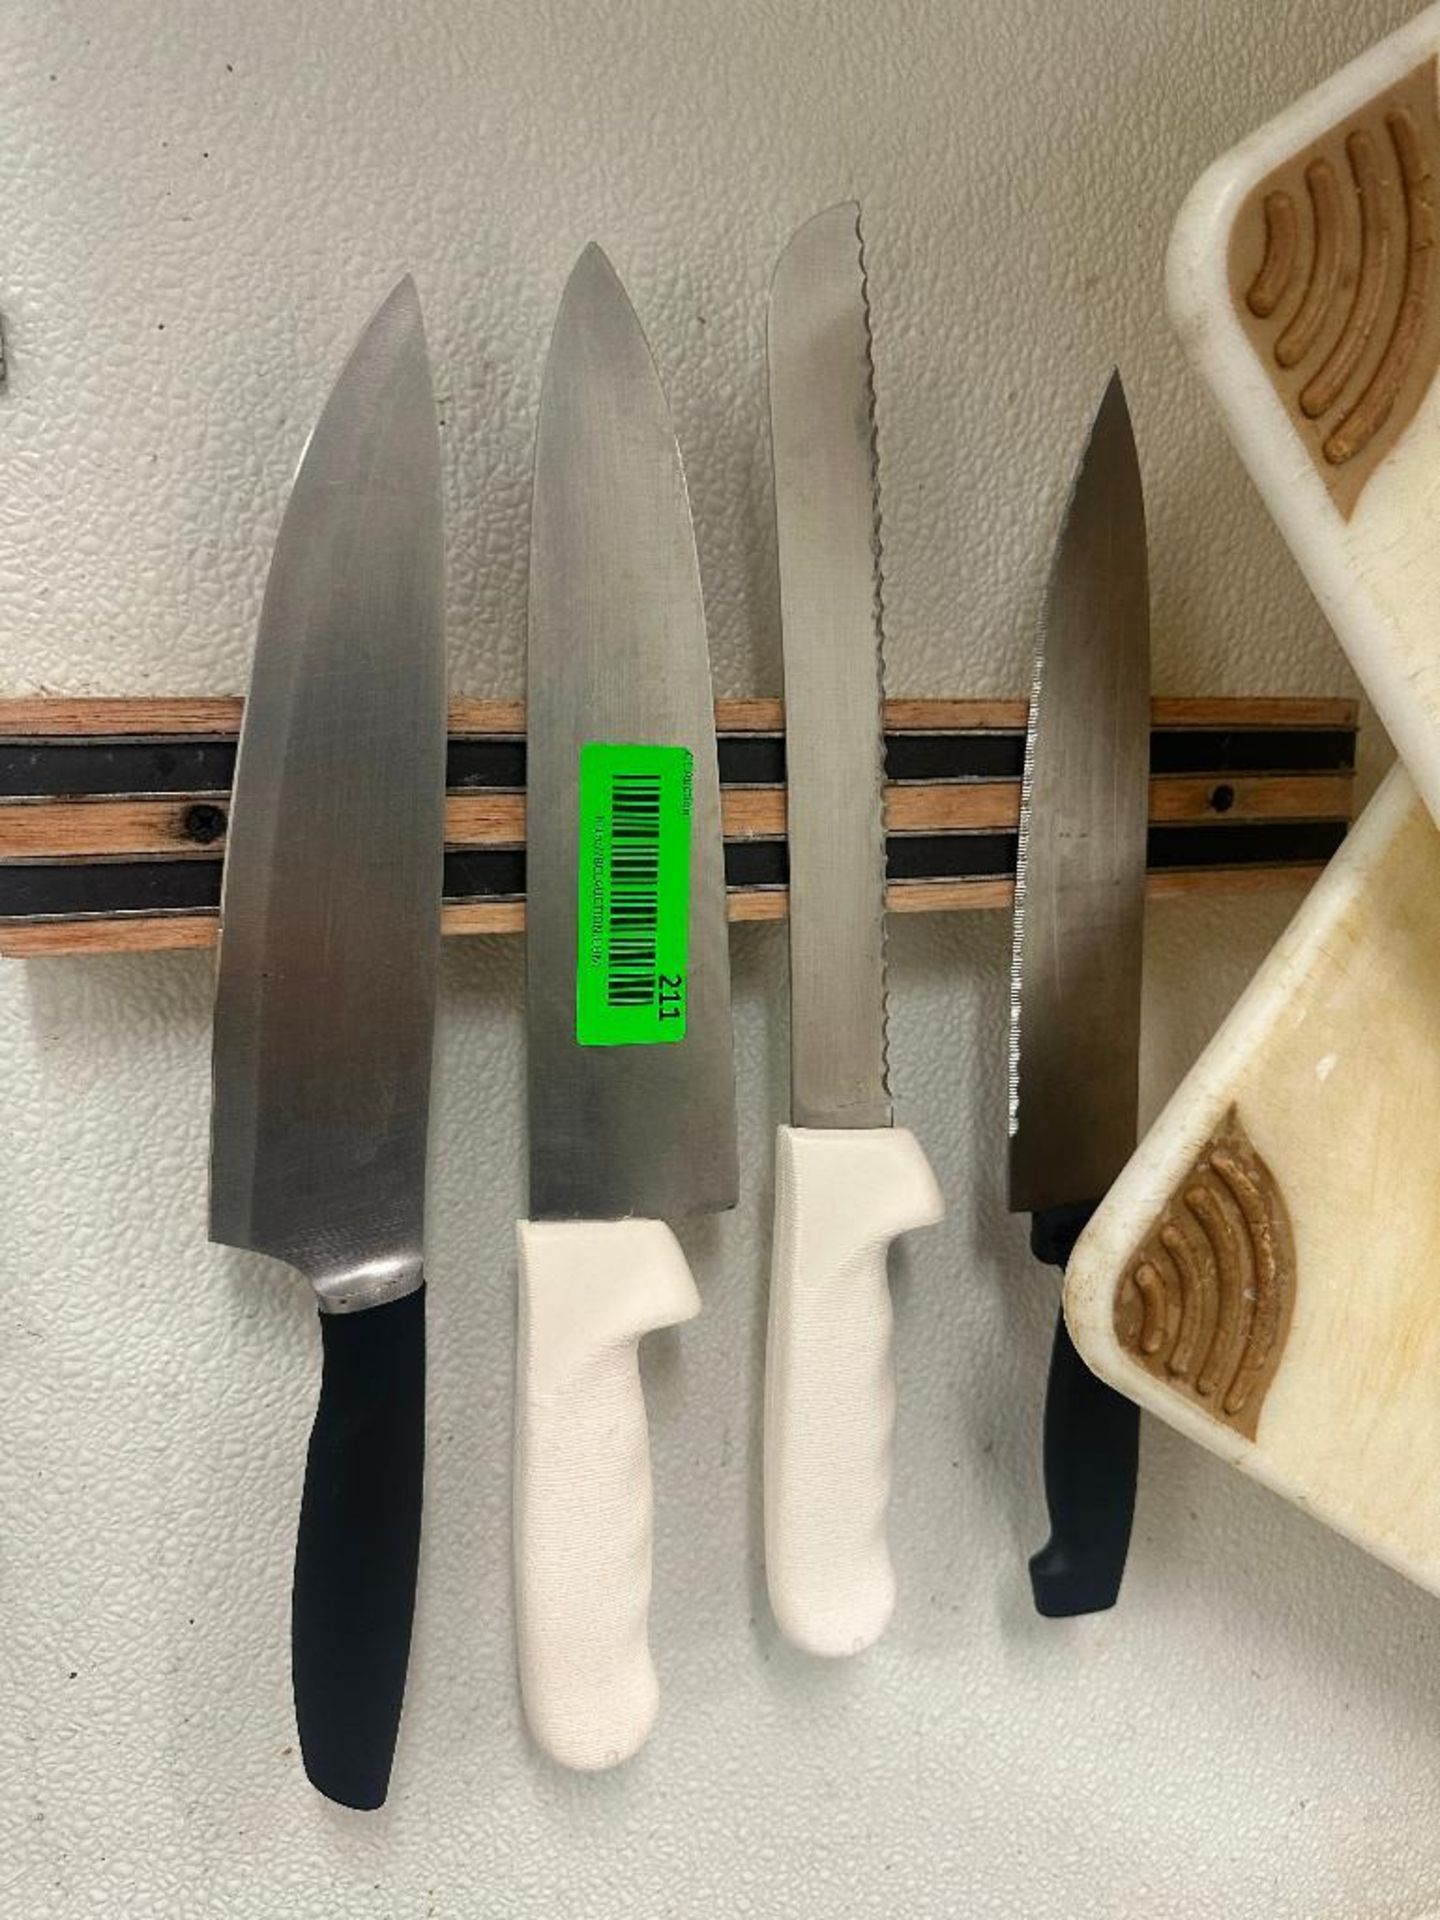 DESCRIPTION MAGNETIC KNIFE HOLDER W/ CONTENTS - 4 KNIVES. THIS LOT IS: ONE MONEY LOCATION 180 East W